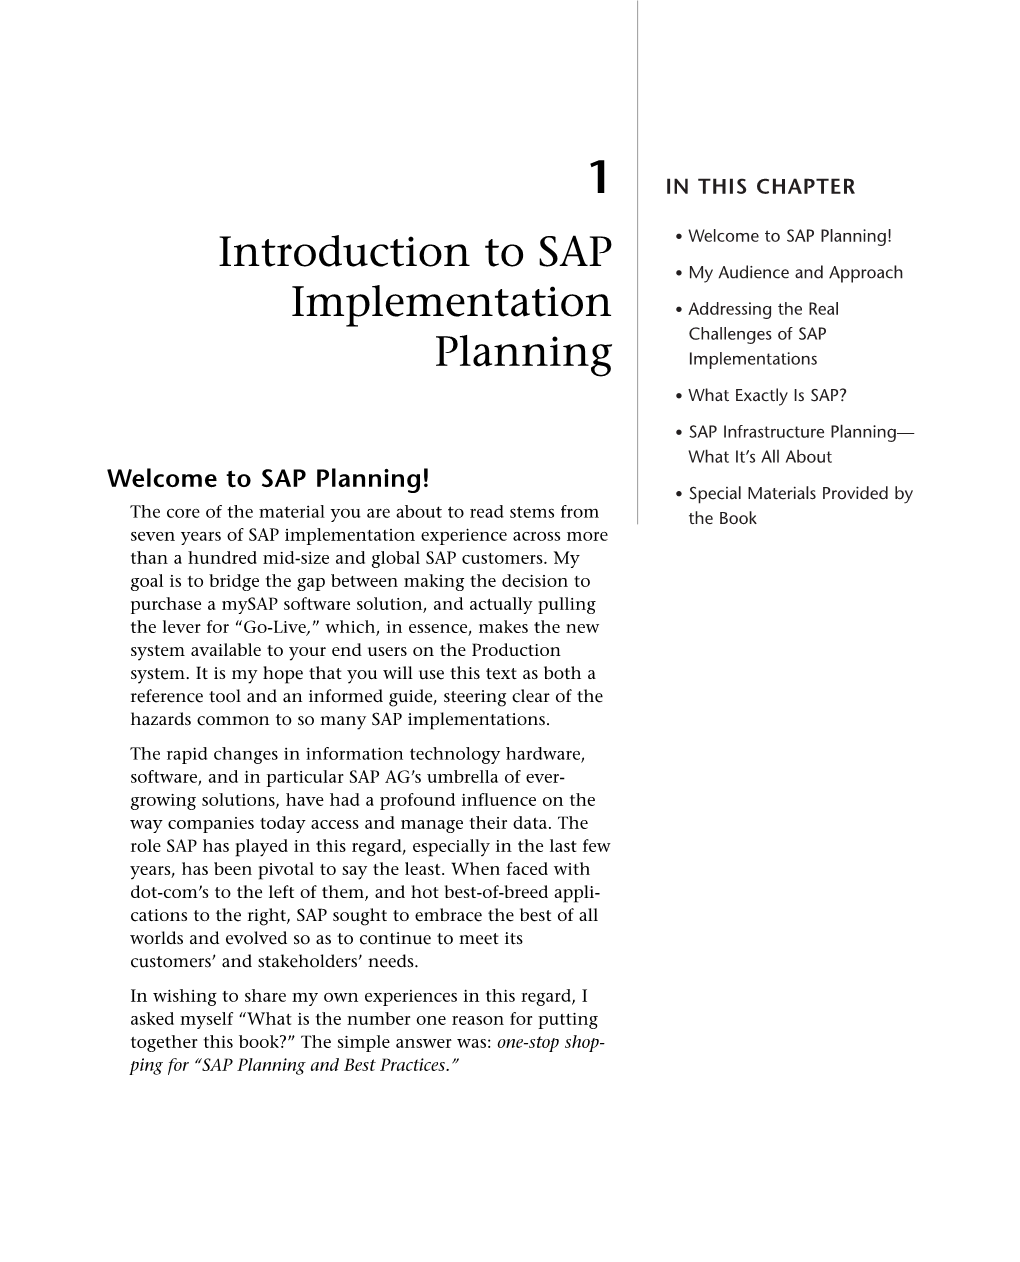 Introduction to SAP Implementation Planning